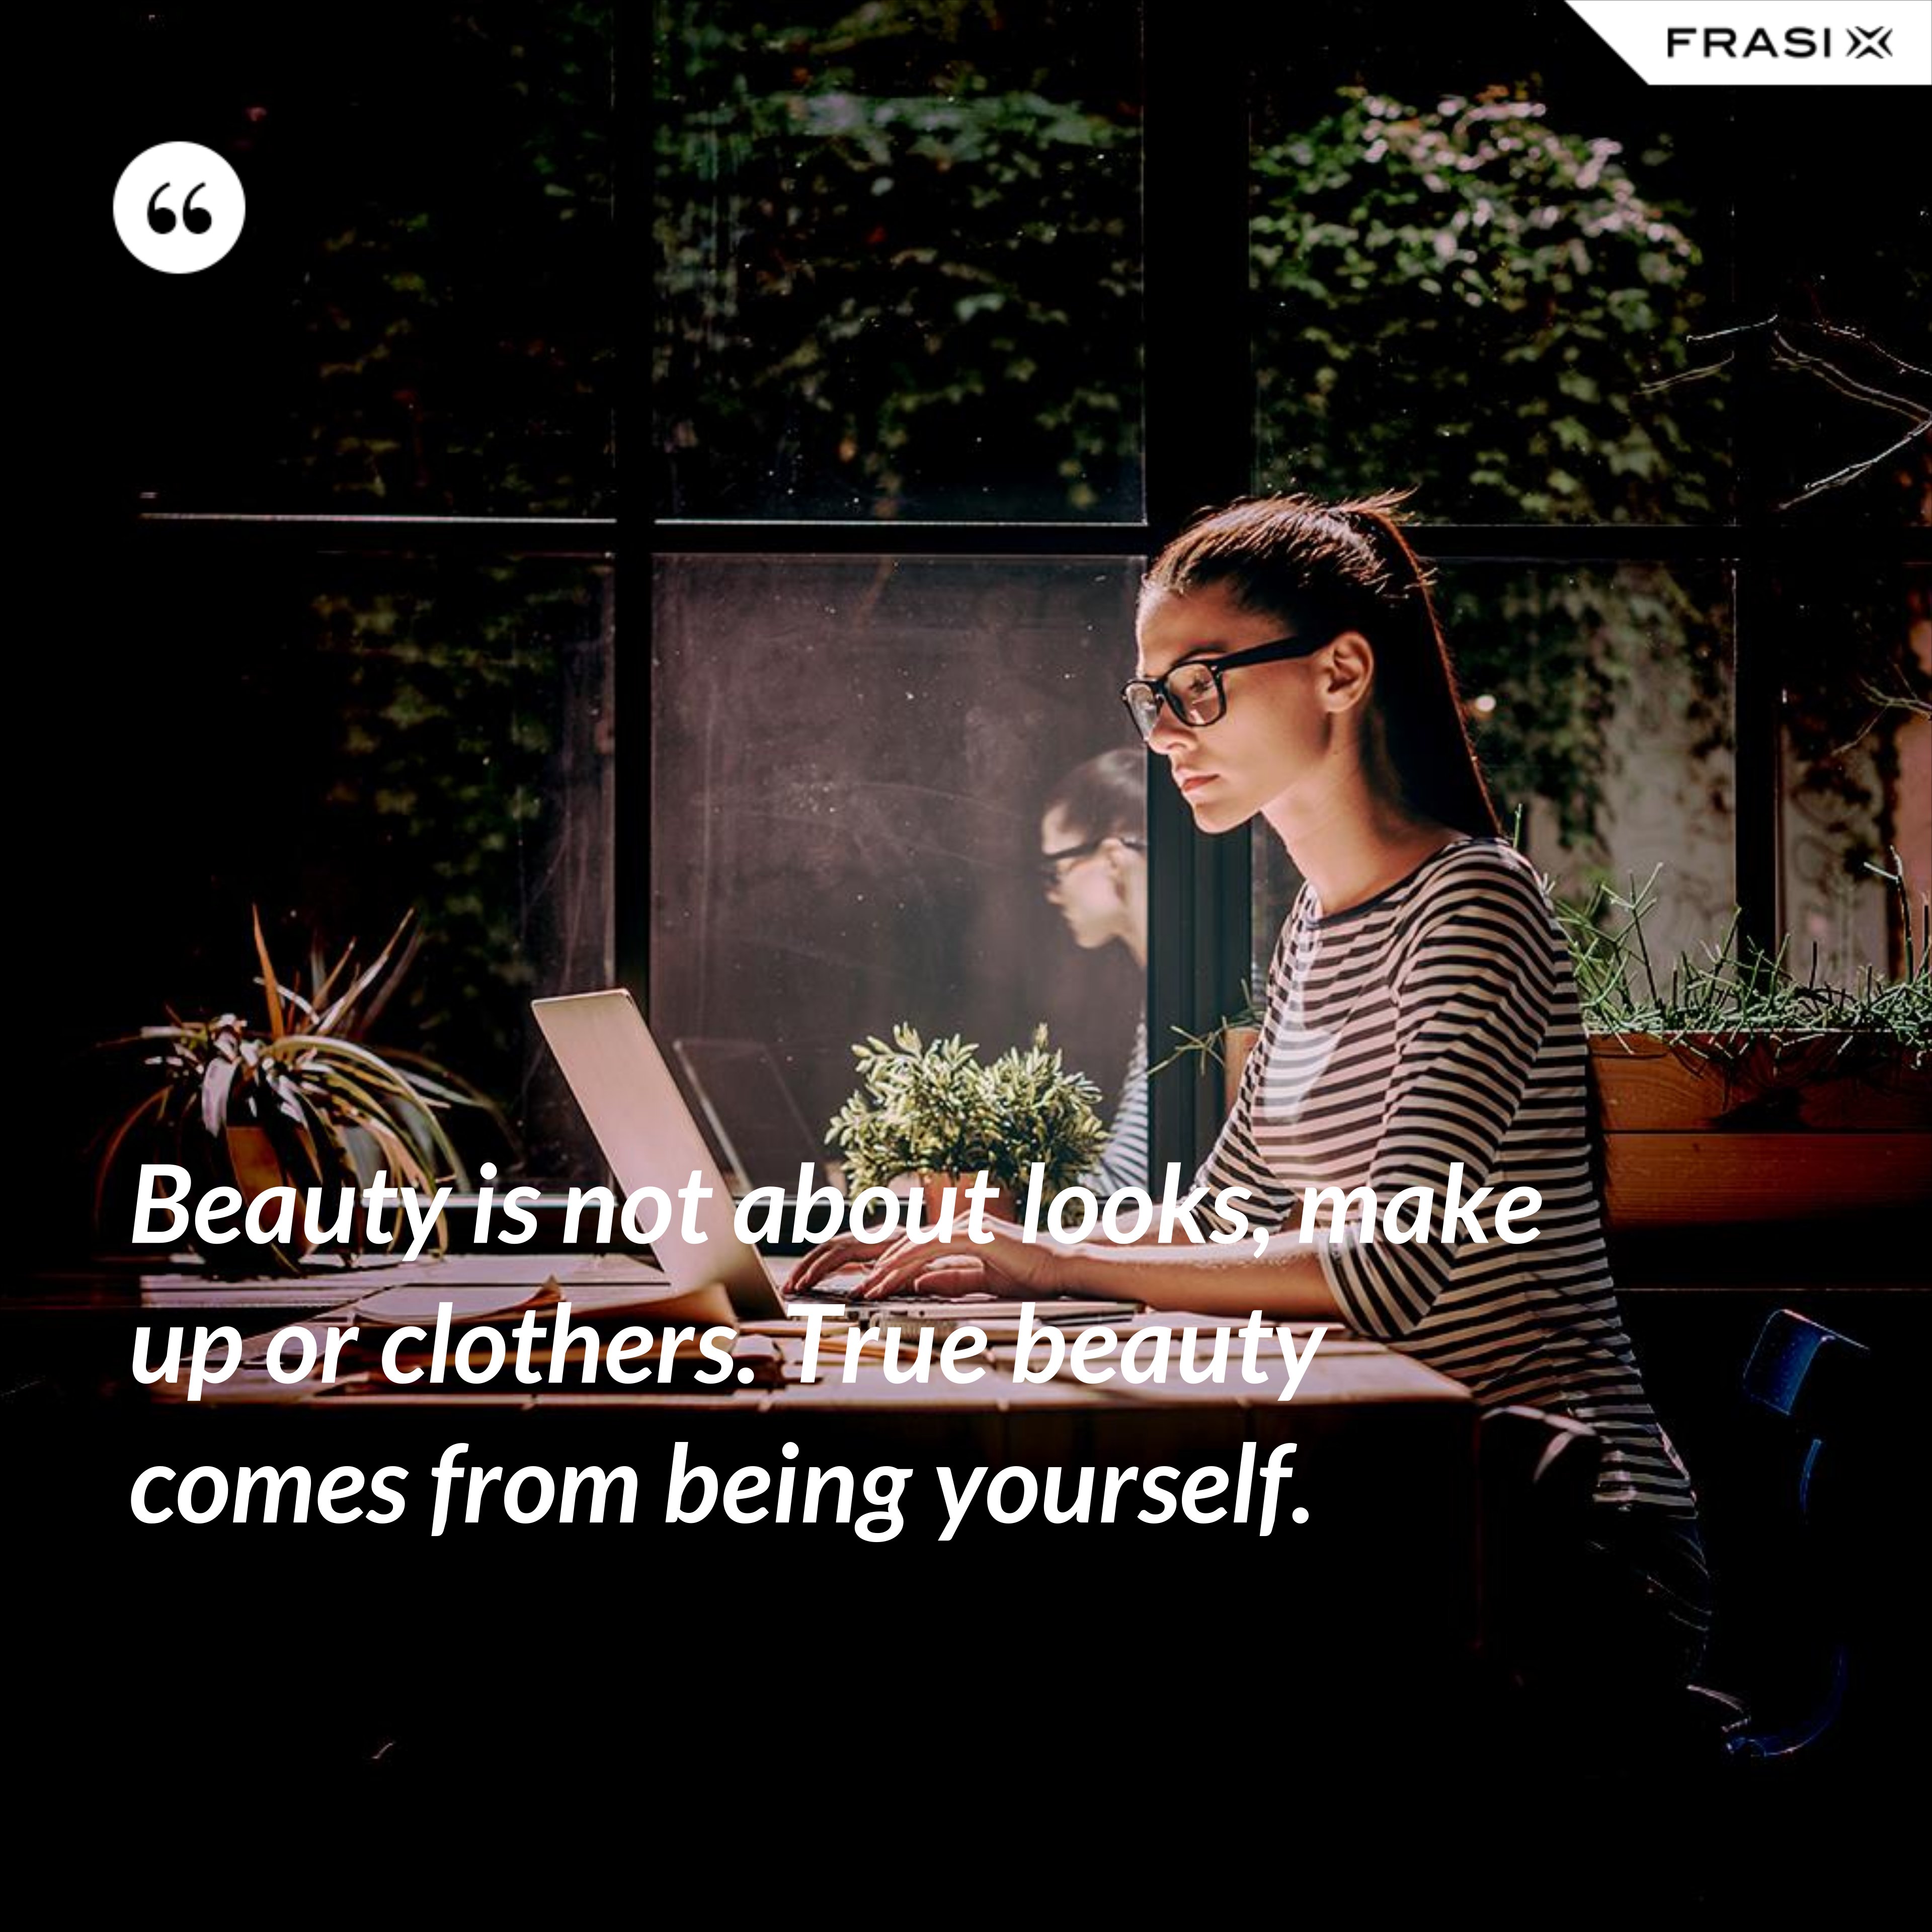 Beauty is not about looks, make up or clothers. True beauty comes from being yourself. - Anonimo